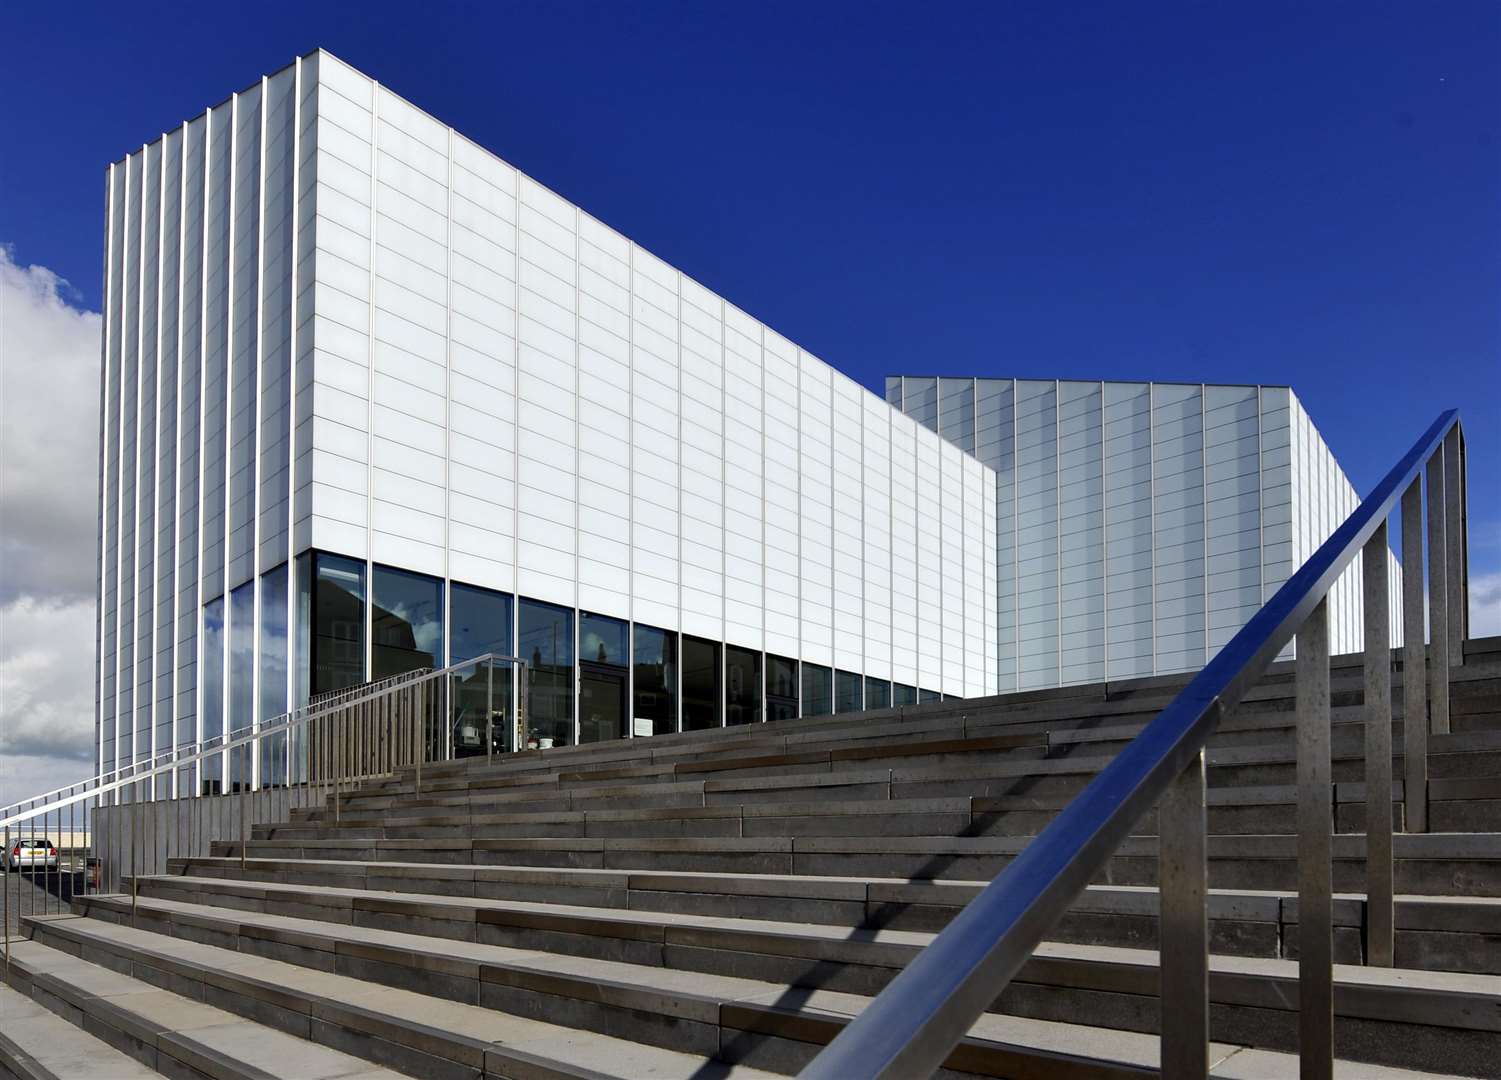 The Turner Contemporary could be expanded